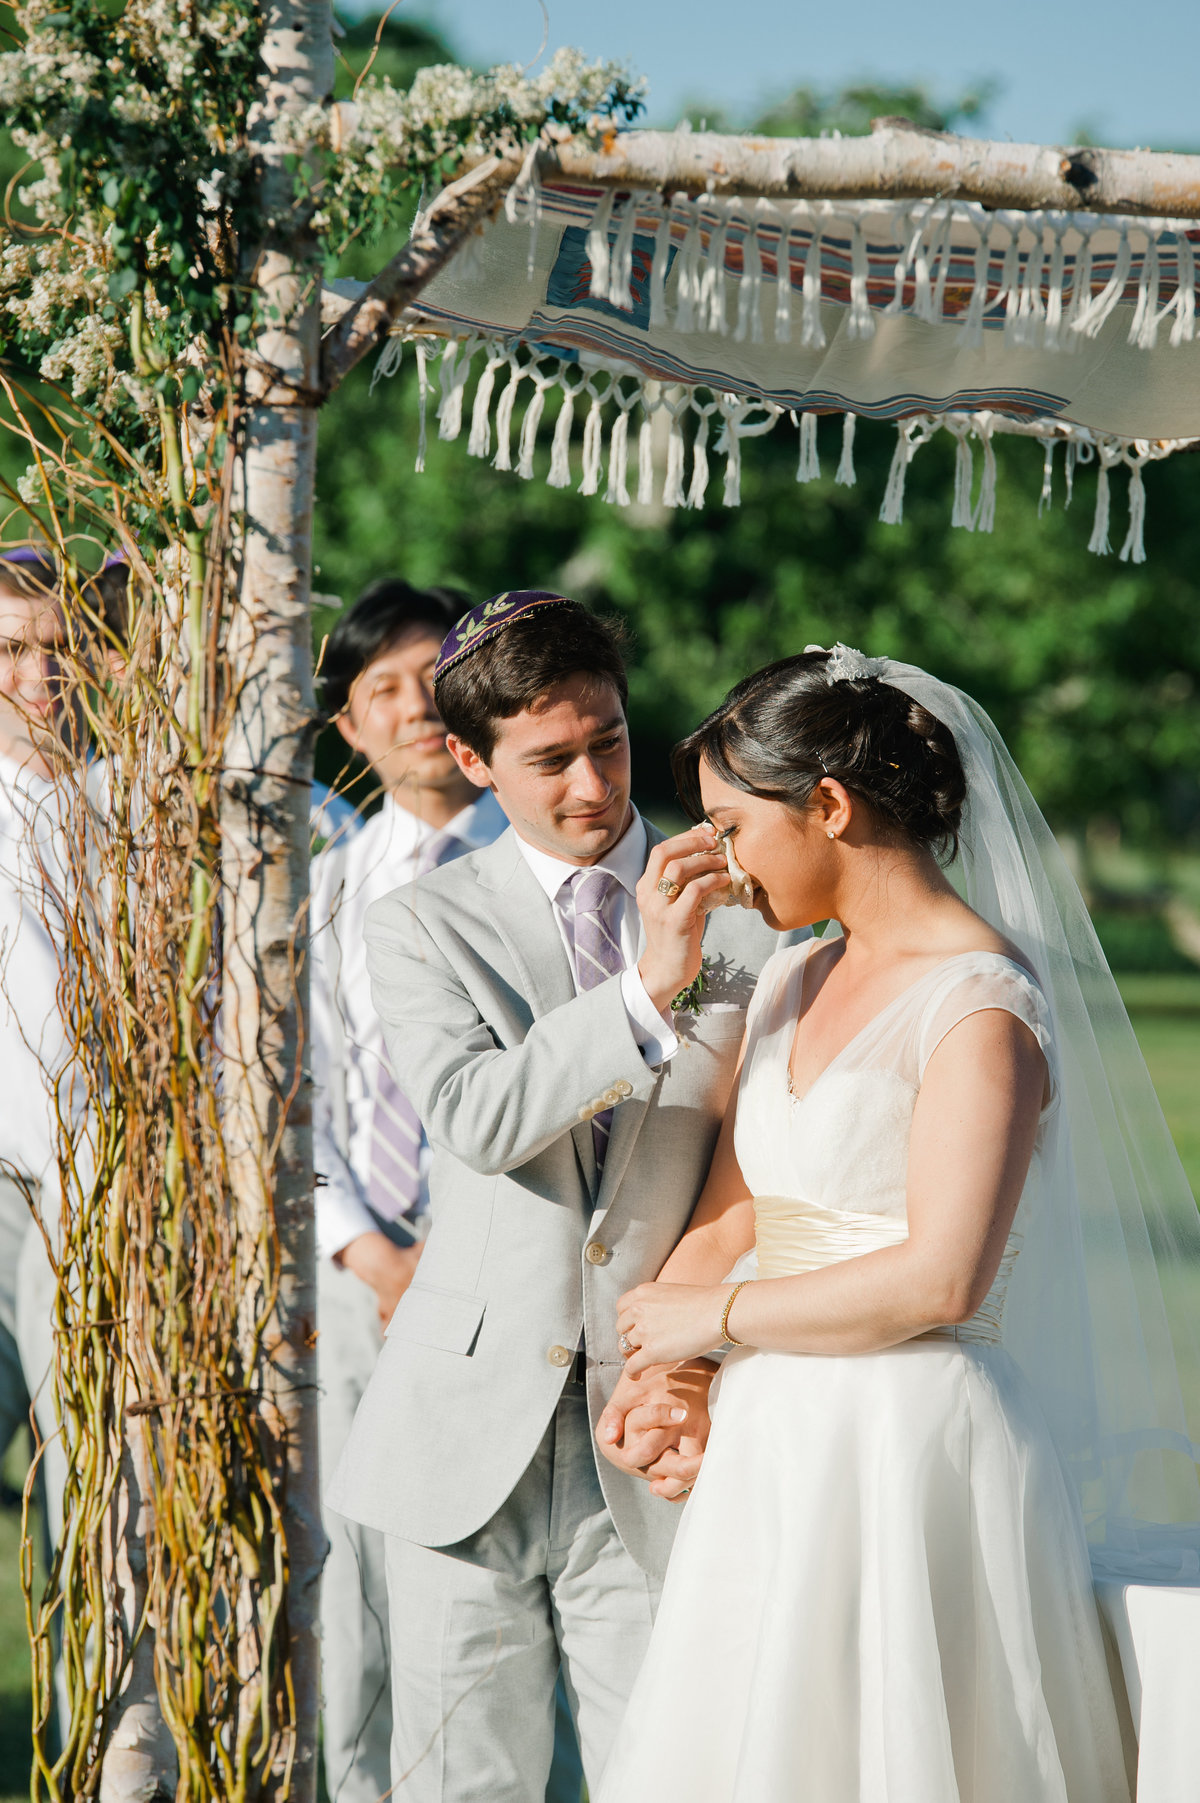 Groom wipes away bride's tears during ceremony